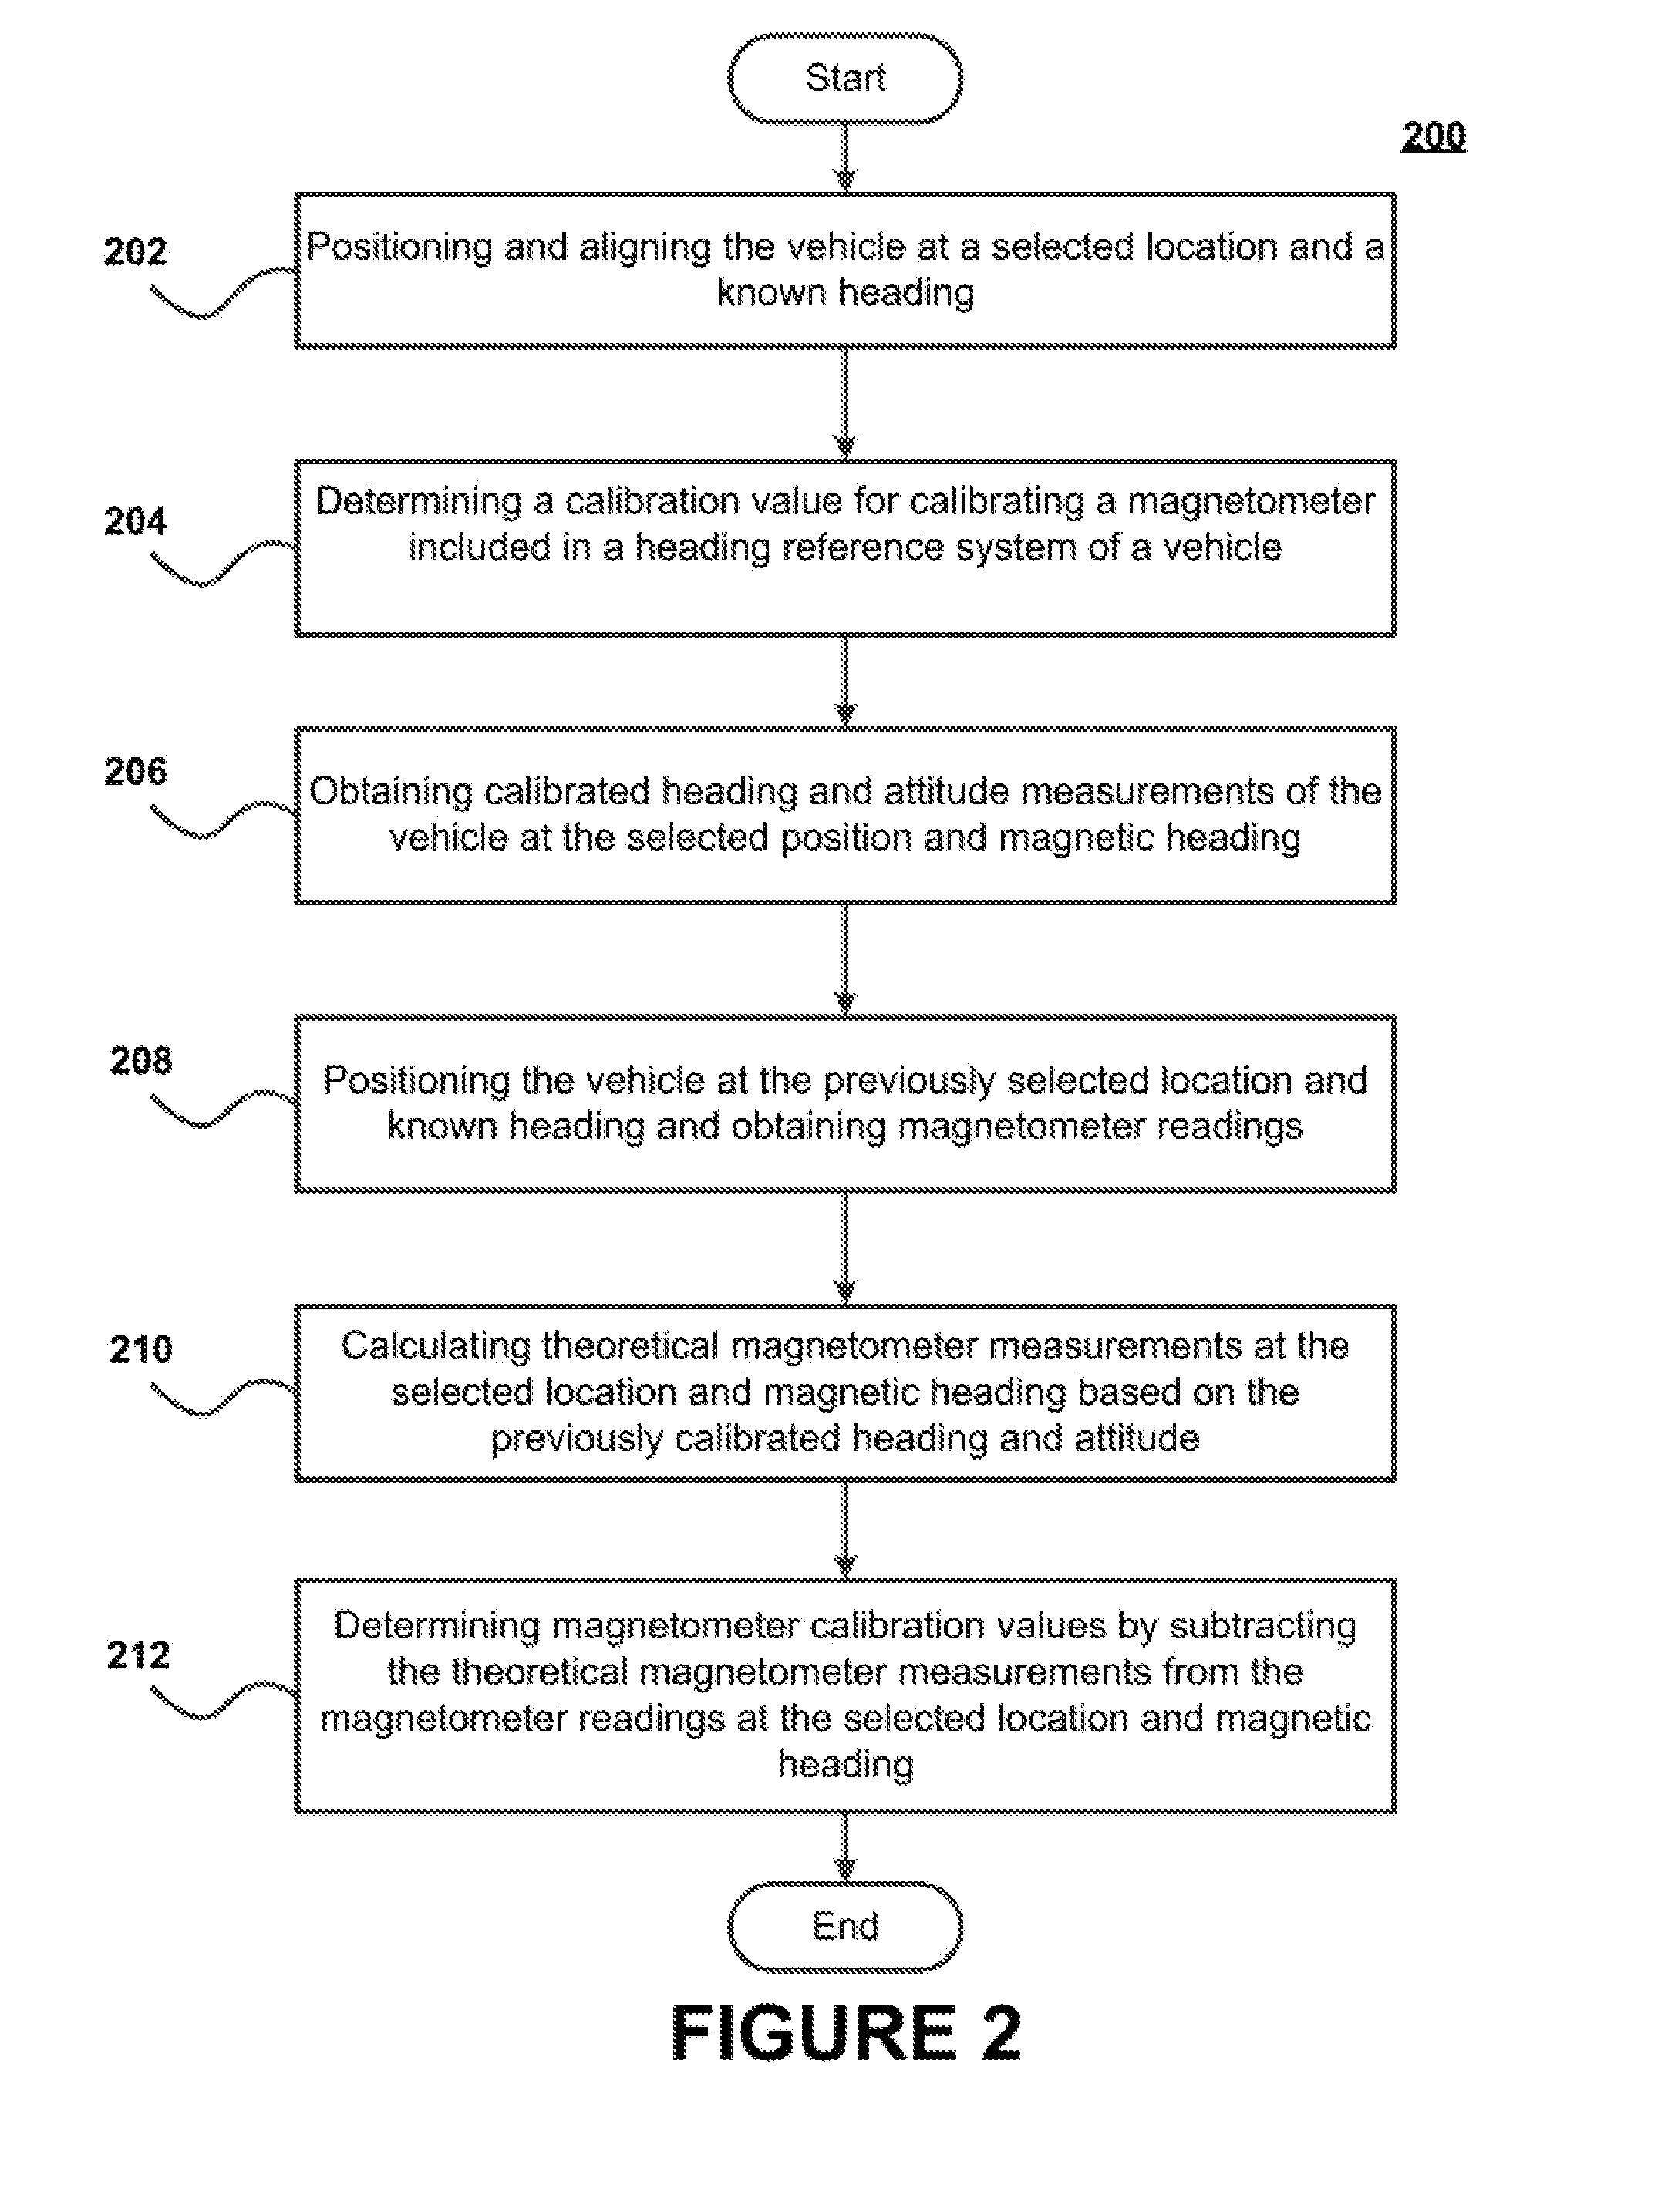 Systems and methods for calibrating and adjusting a heading reference system